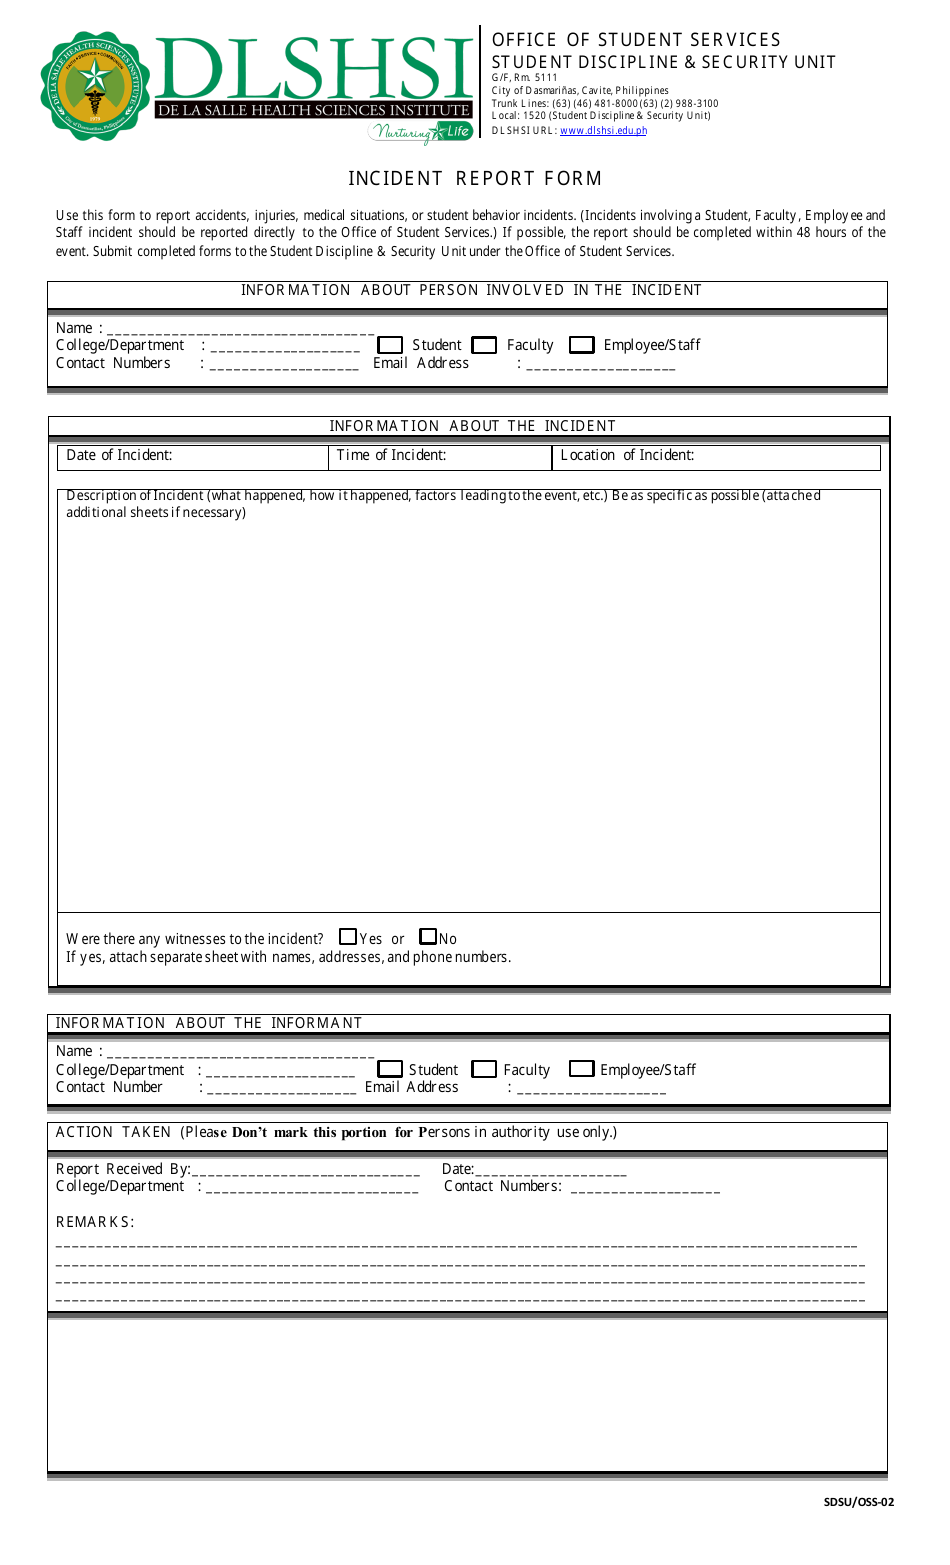 Incident Report Form - Dlshsi, Page 1